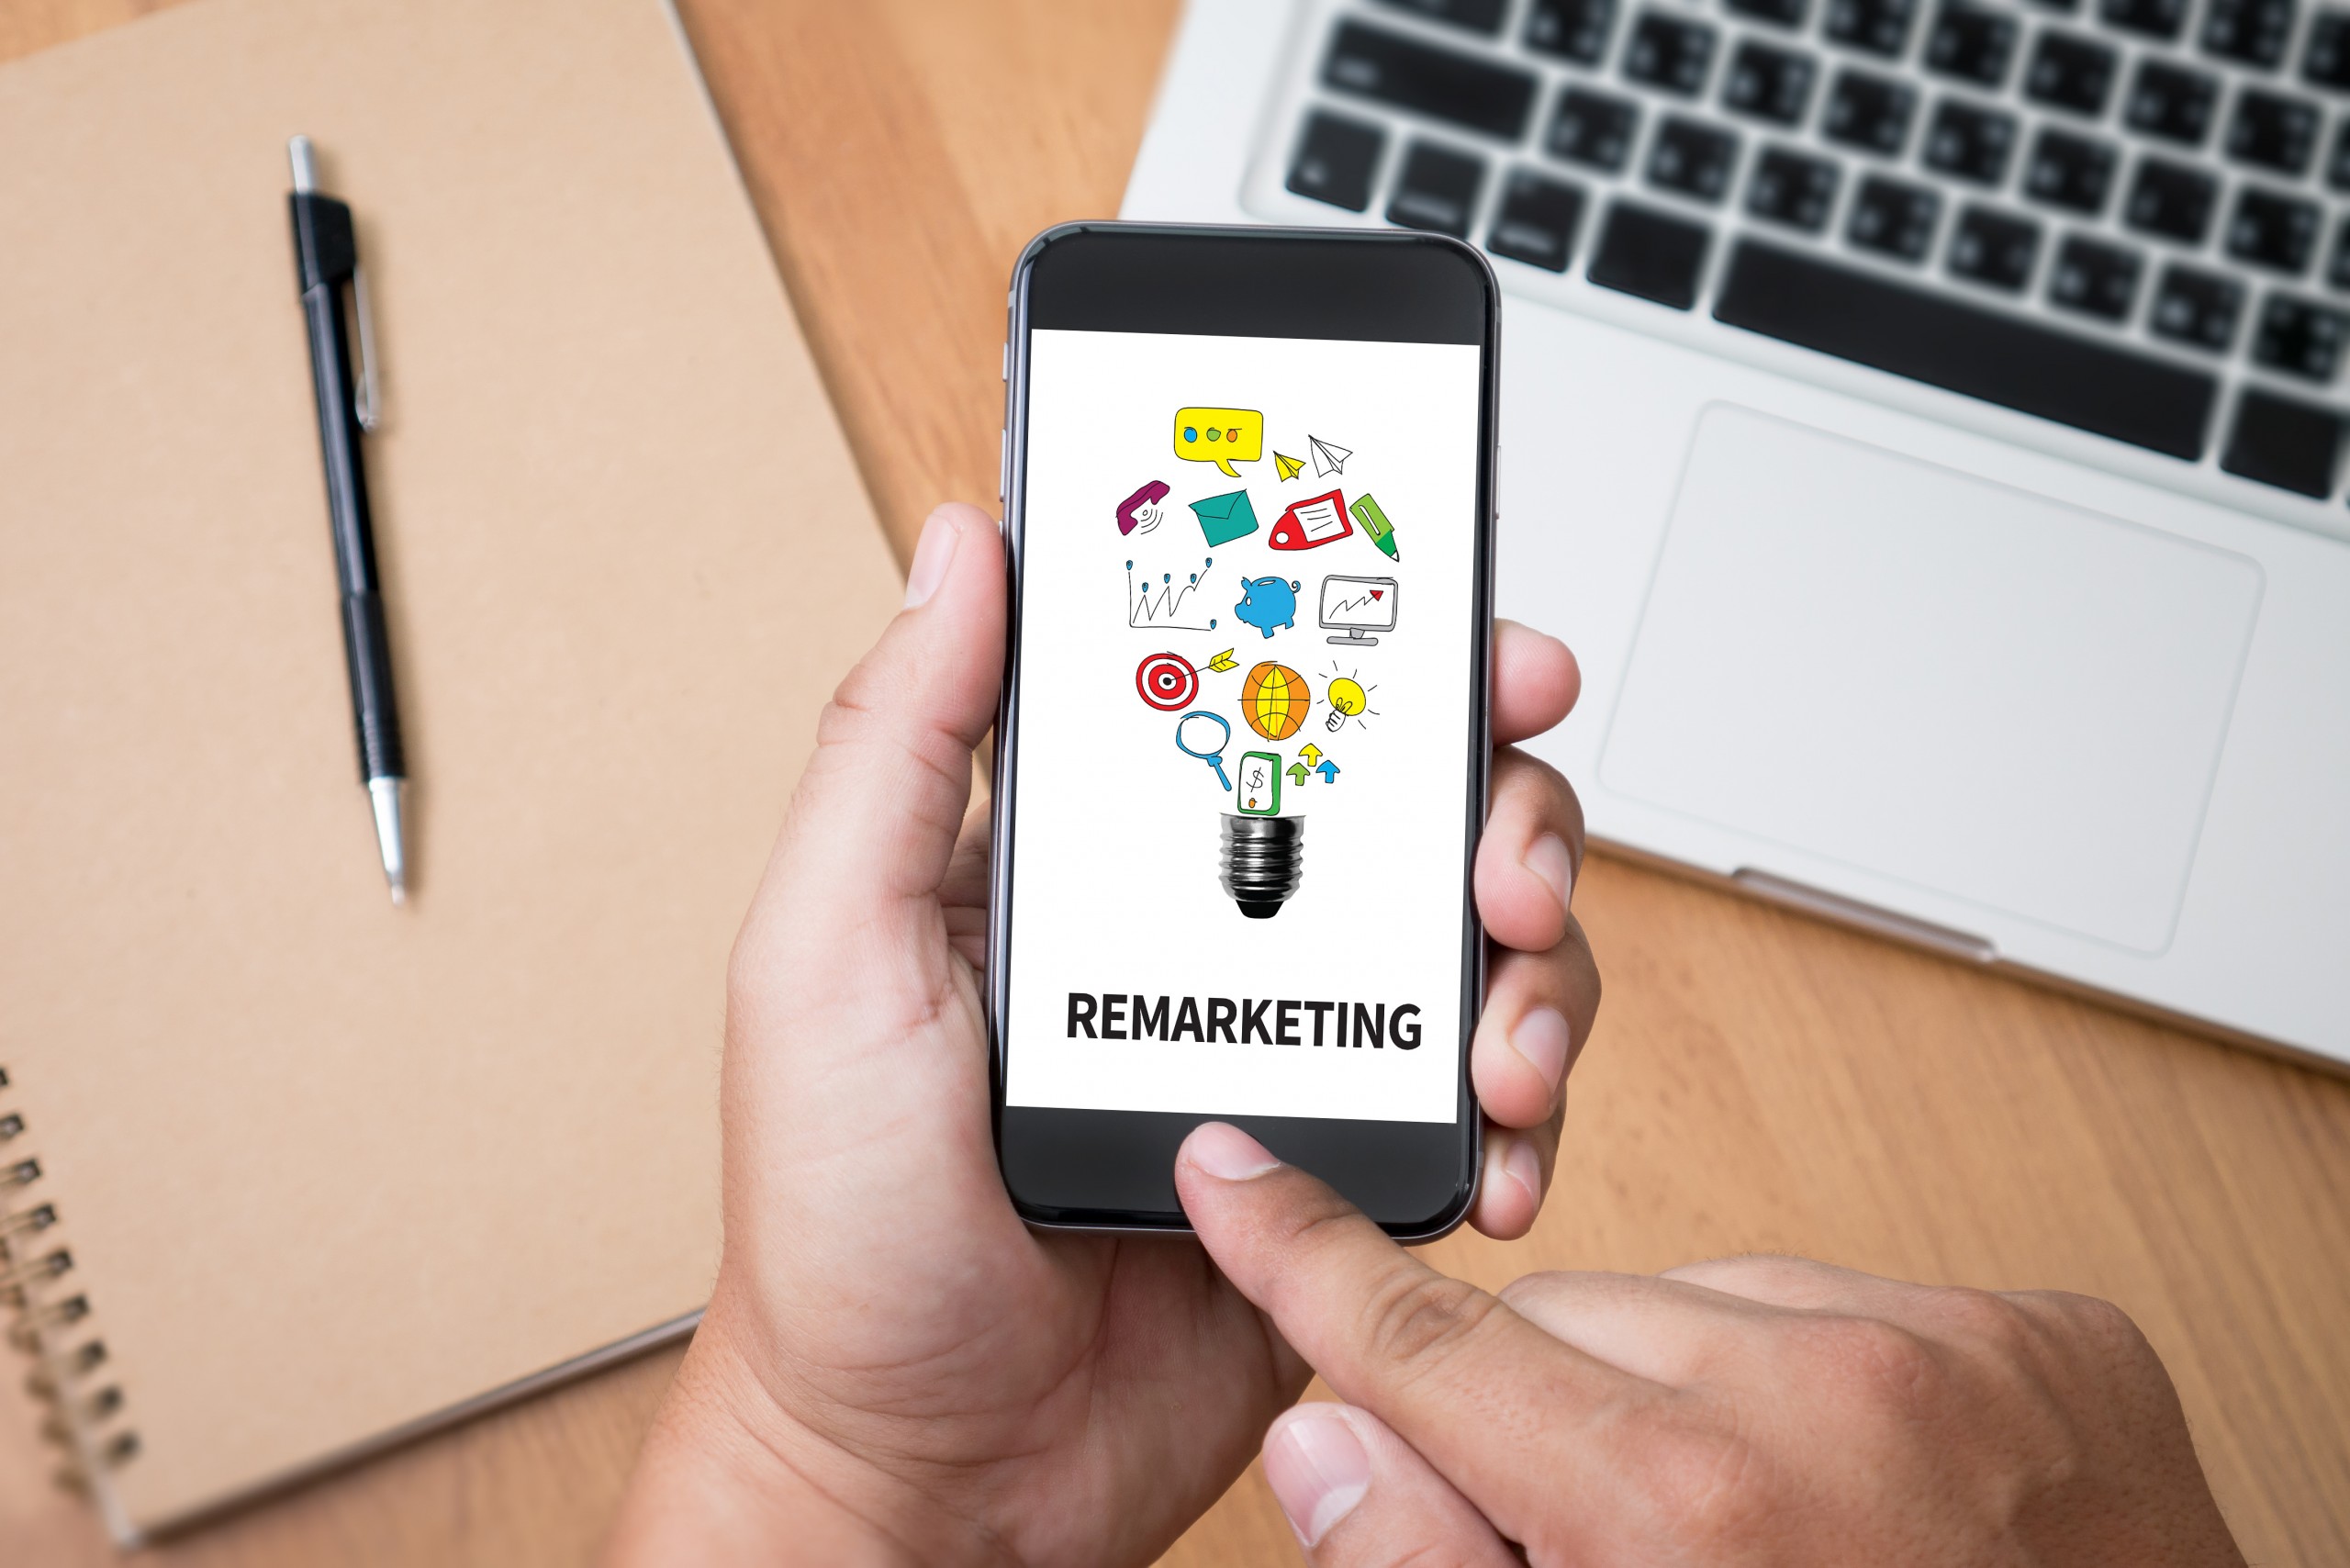 Image showing hands swiping on a smartphone that says "Remarketing" with a laptop and folder in background.